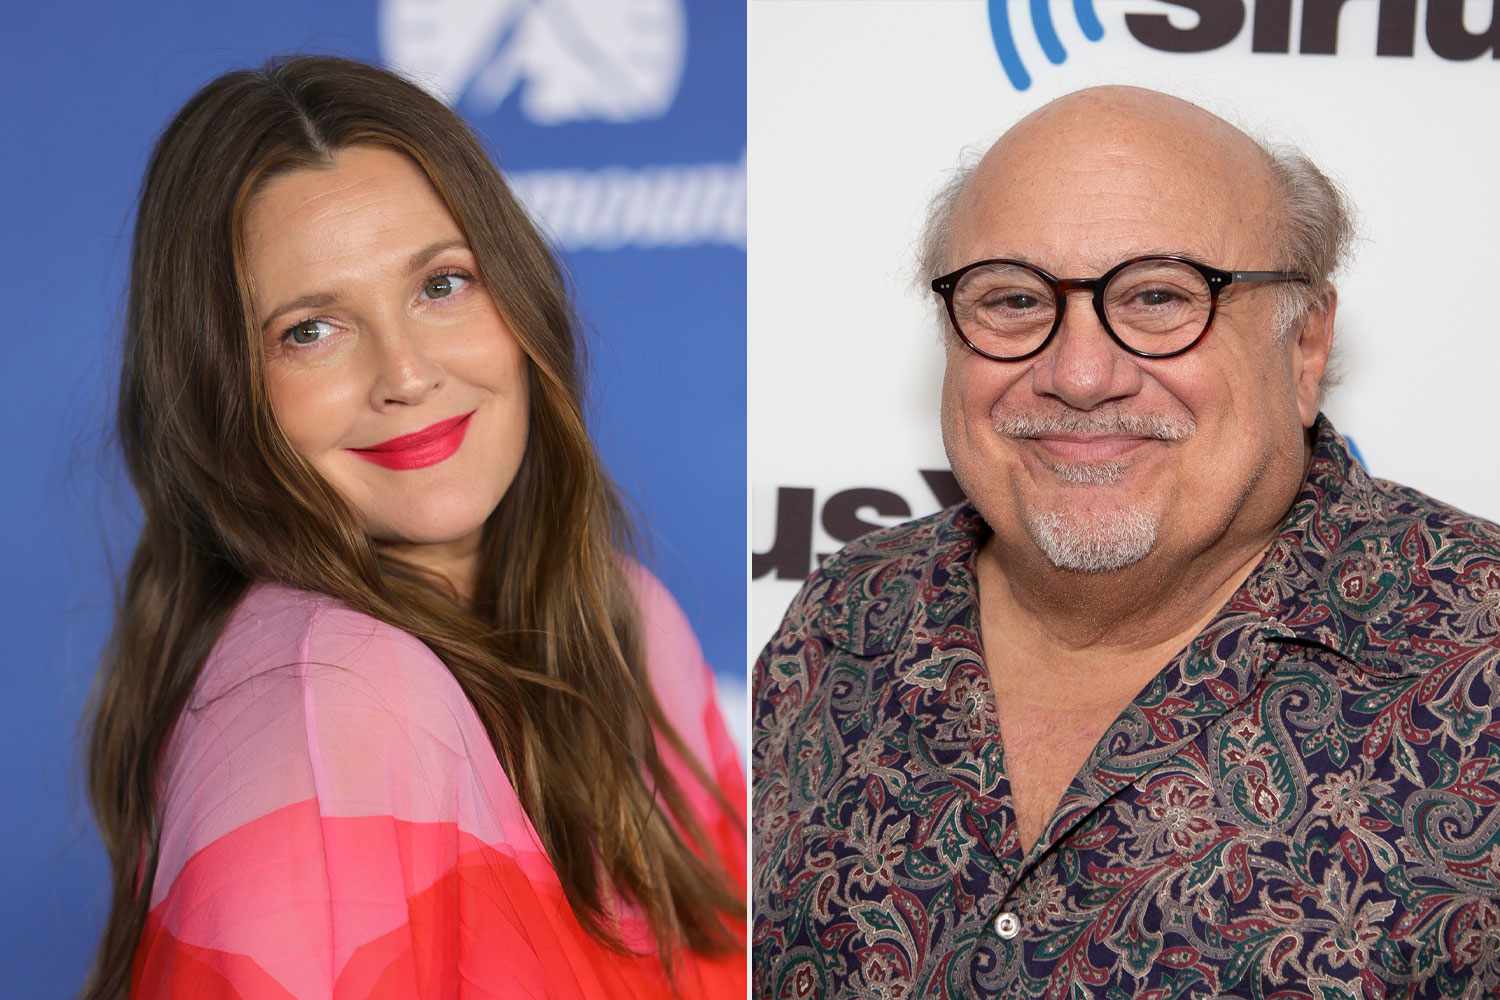 Drew Barrymore accidentally left her 'sex list' at Danny DeVito’s house